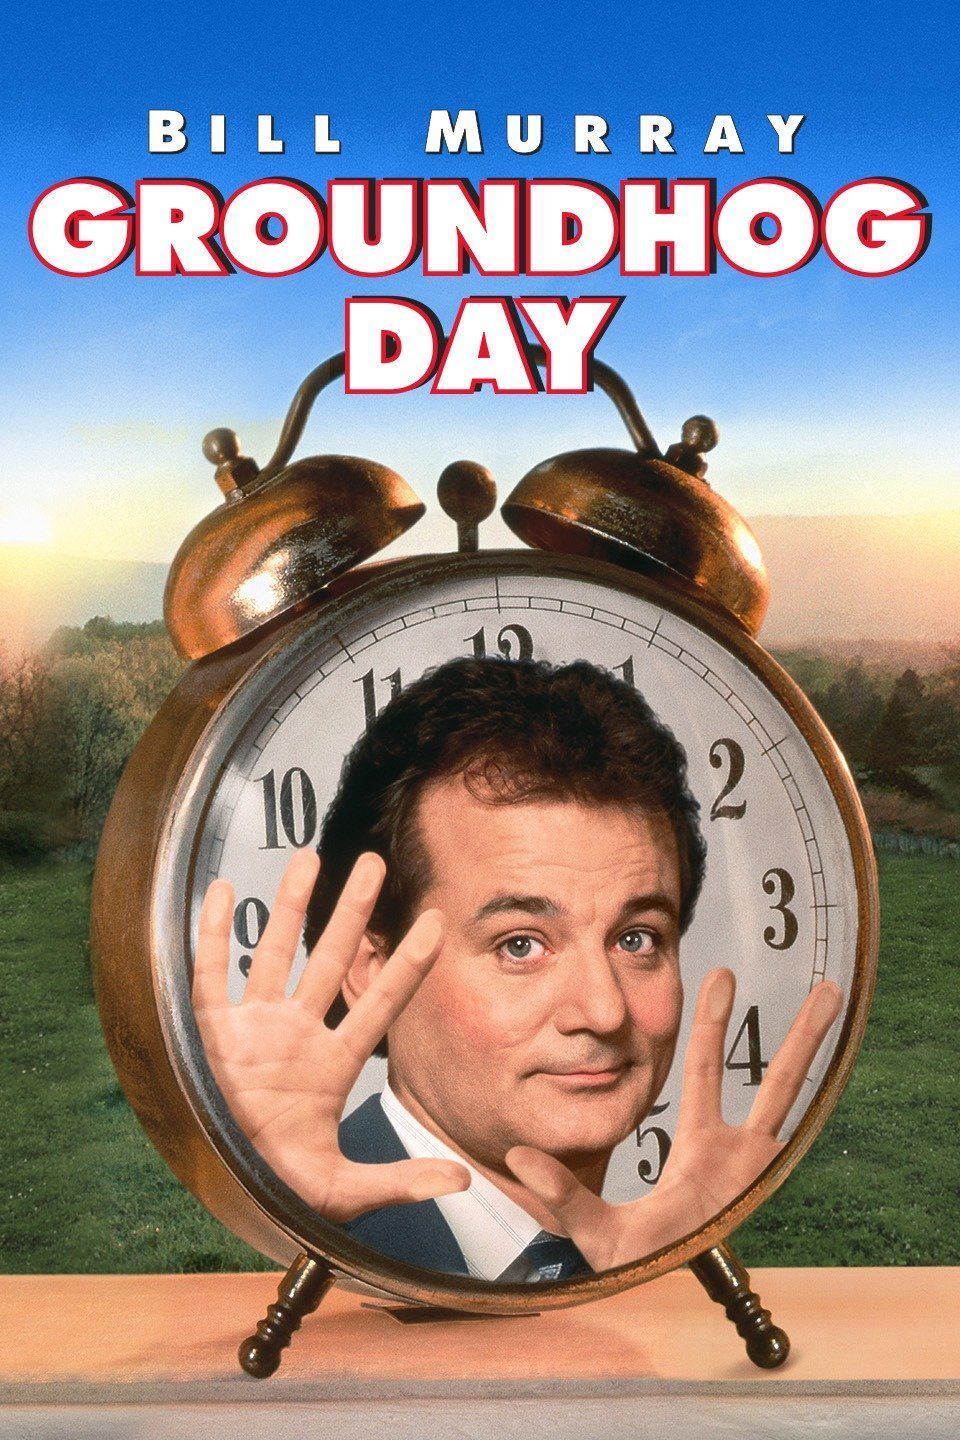 https://thestate270.org/wp-content/uploads/2019/12/groundhog-day-poster.jpg